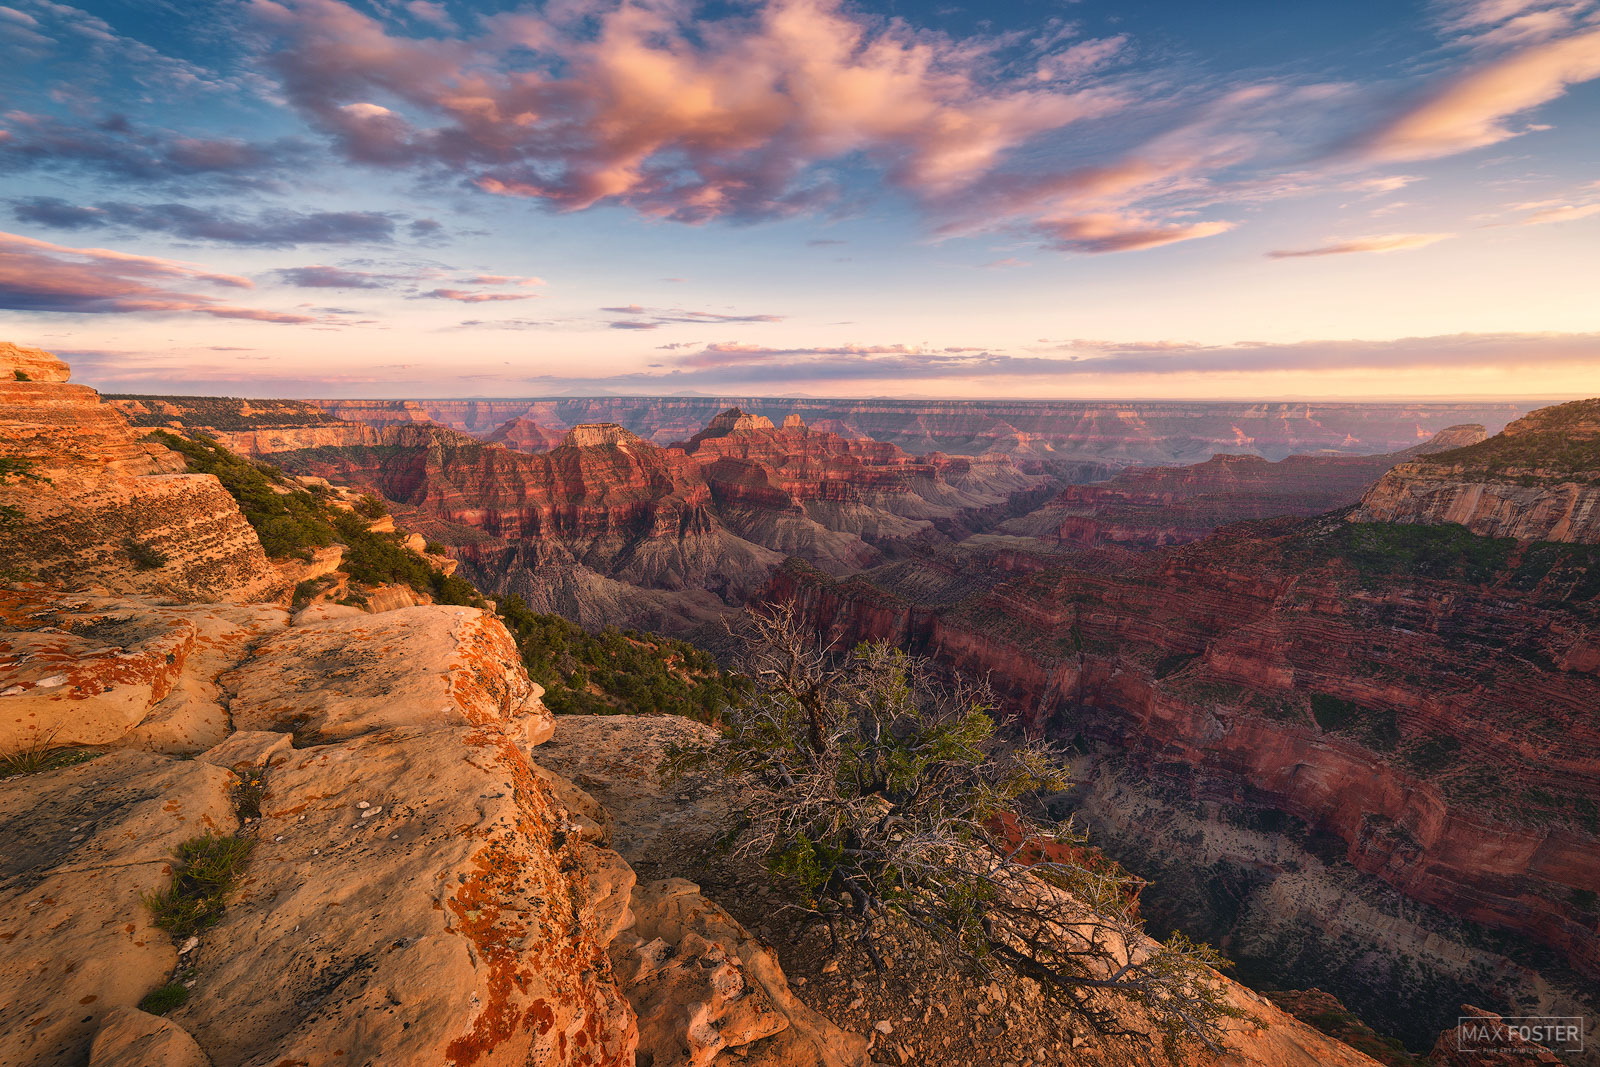 Bring your walls to life with Sunkissed, Max Foster's limited edition photography print from his Grand Canyon gallery collection...